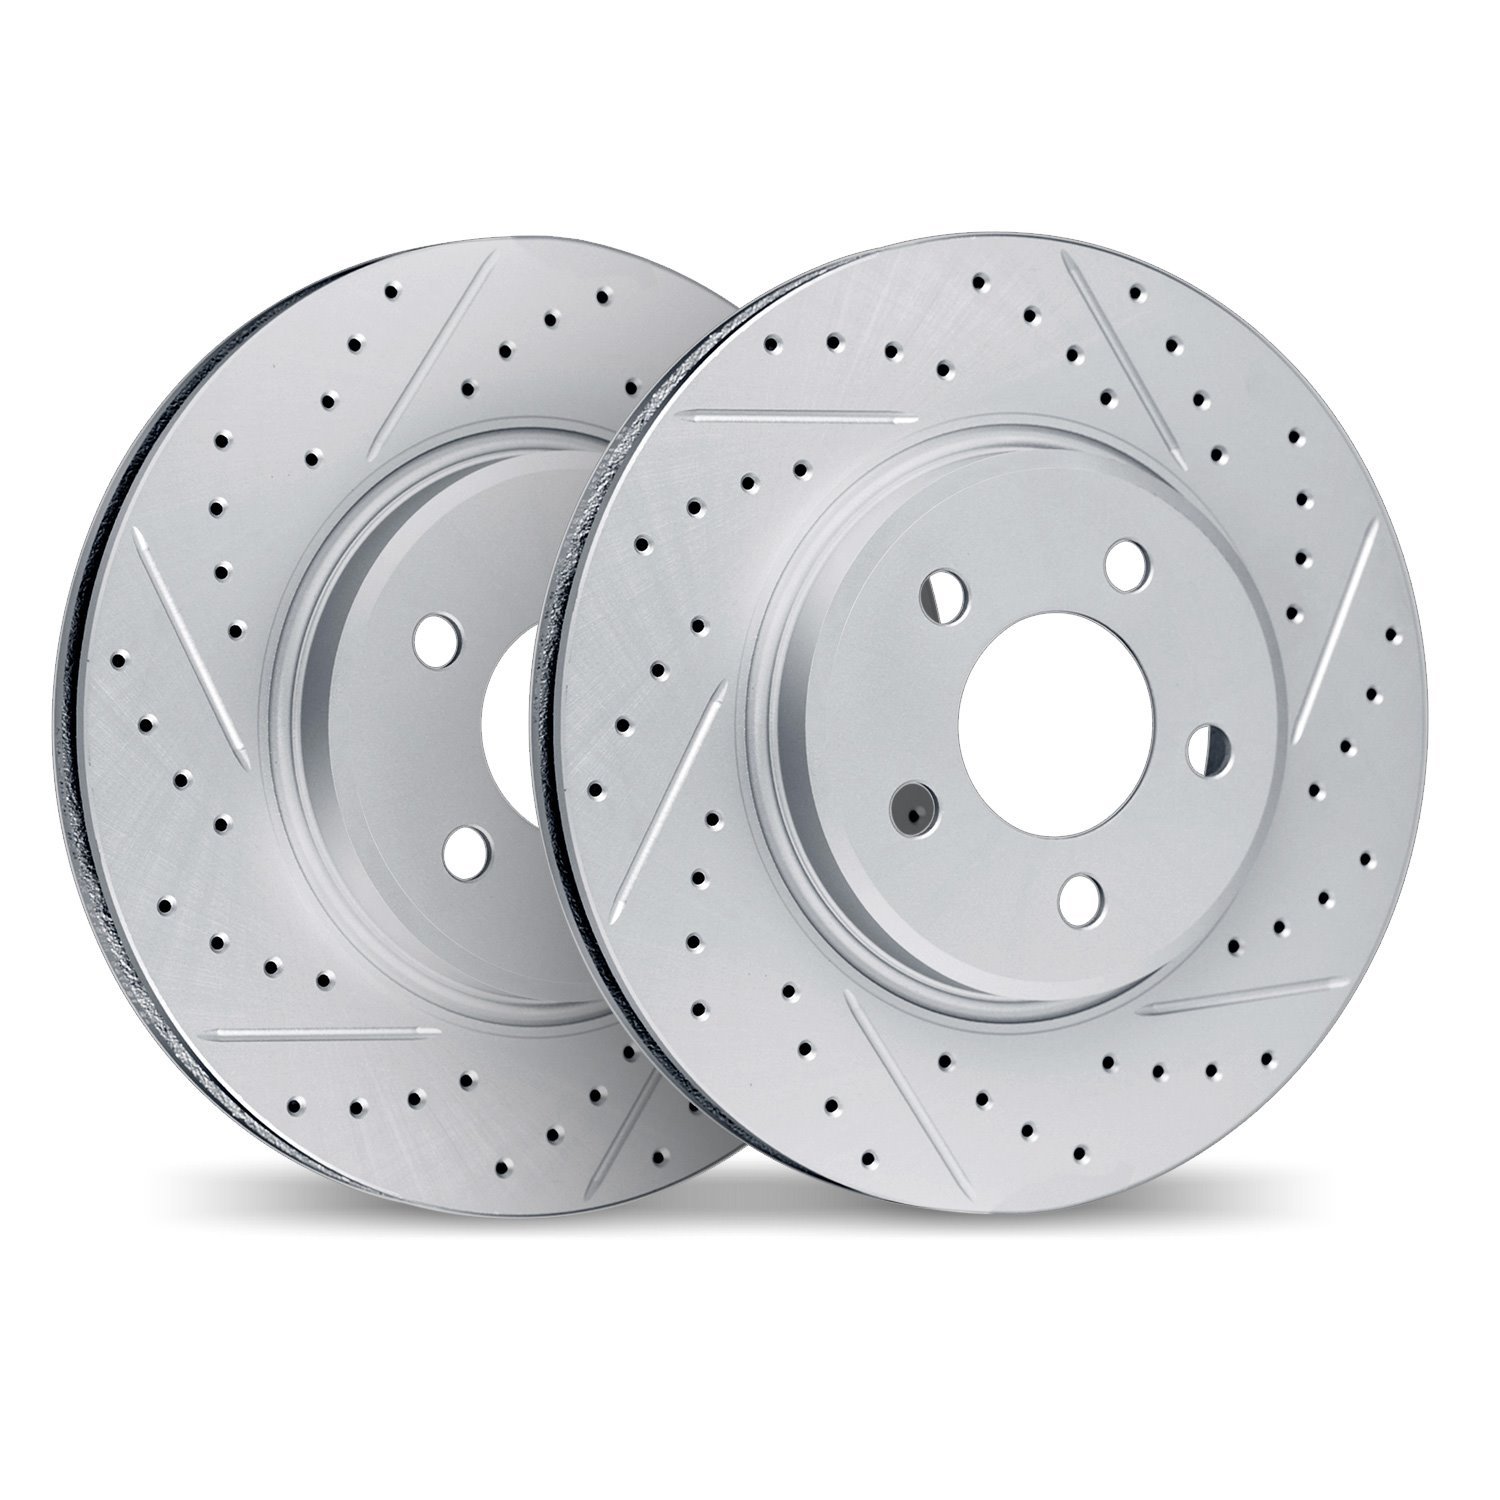 2002-58066 Geoperformance Drilled/Slotted Brake Rotors, Fits Select Acura/Honda, Position: Front